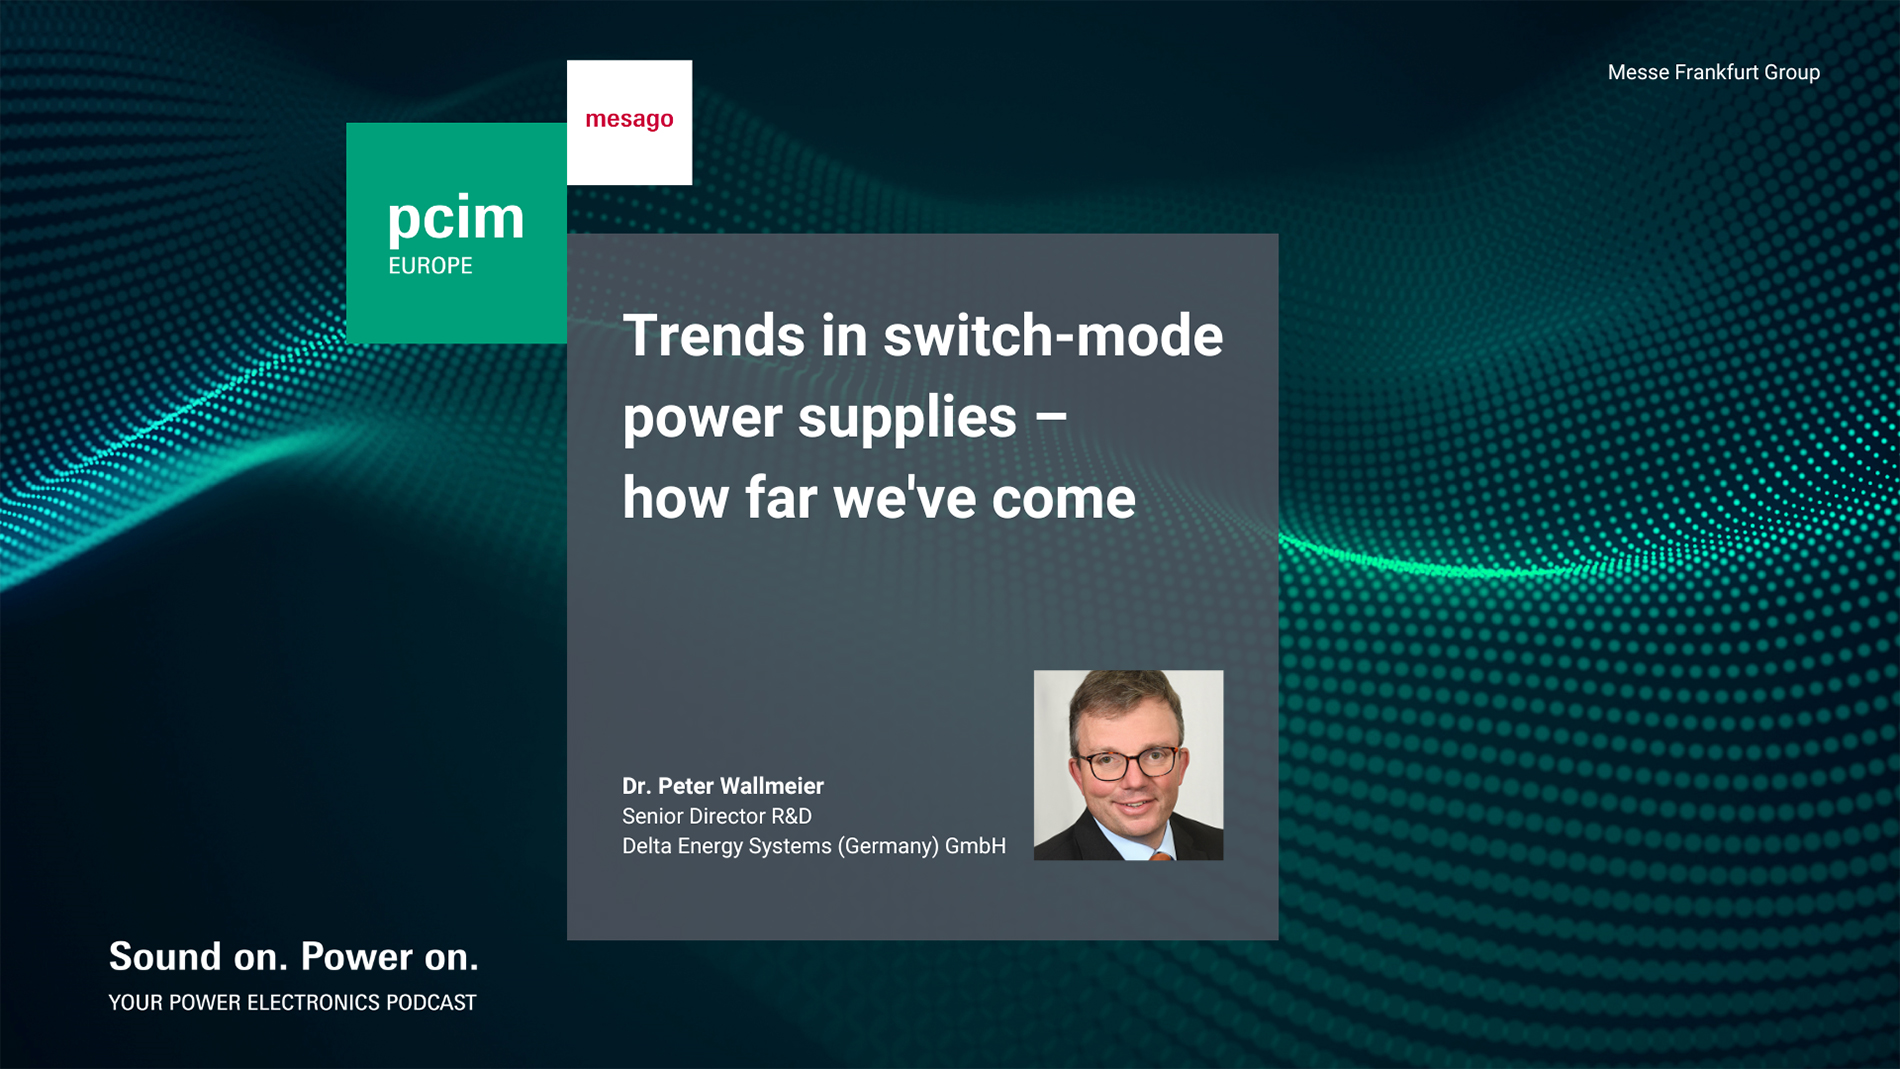 Dr. Peter Wallmeier from Delta Energy Systems on Trends in switch-mode power supplies